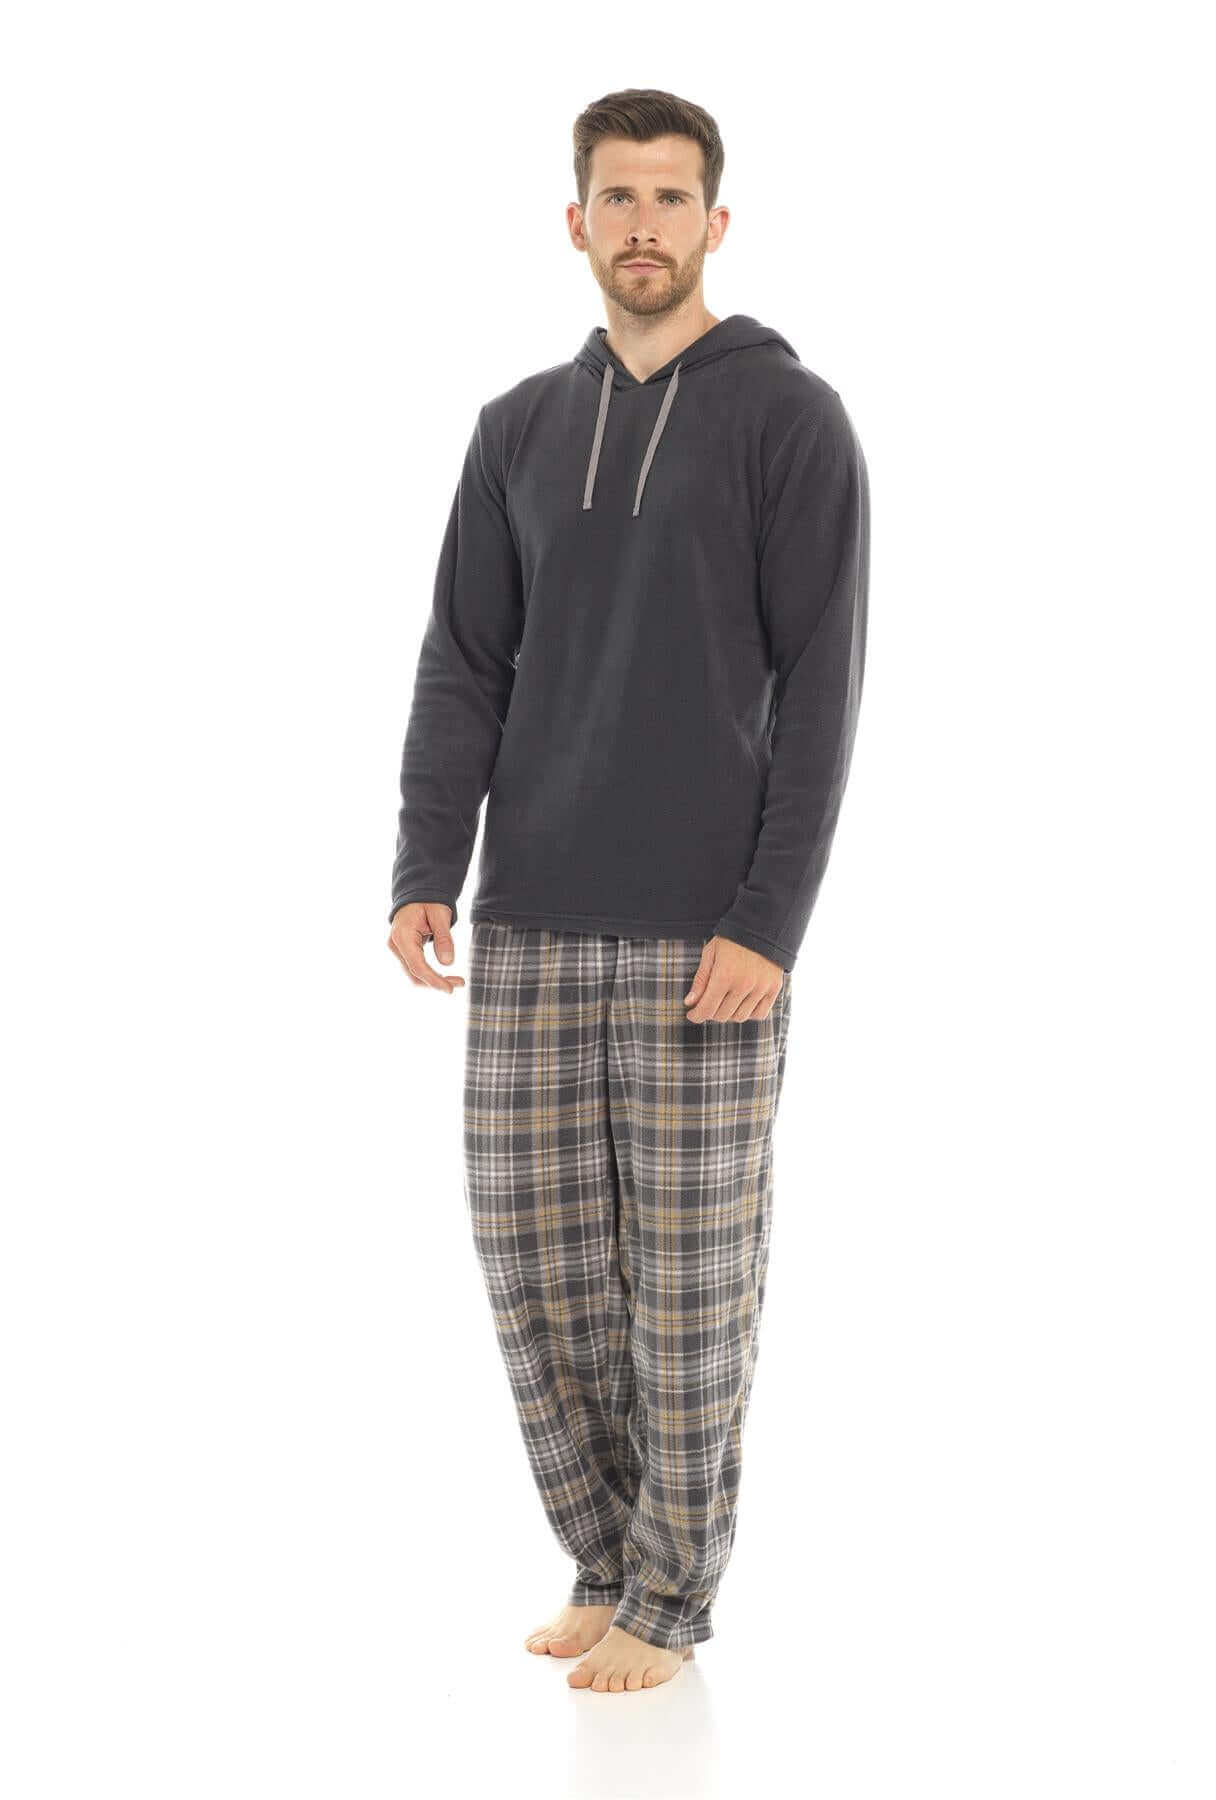 Men's Hooded Check Fleece Pyjama Set With Check Bottoms Warm Winter PJ Sets. Buy now for £20.00. A Pyjamas by Sock Stack. athletics, bottom, boys, charcoal, check, clothing, comfortable, fleece, fluffy, formal wear, grey, hooded, hoodie, hotel, indoor, la